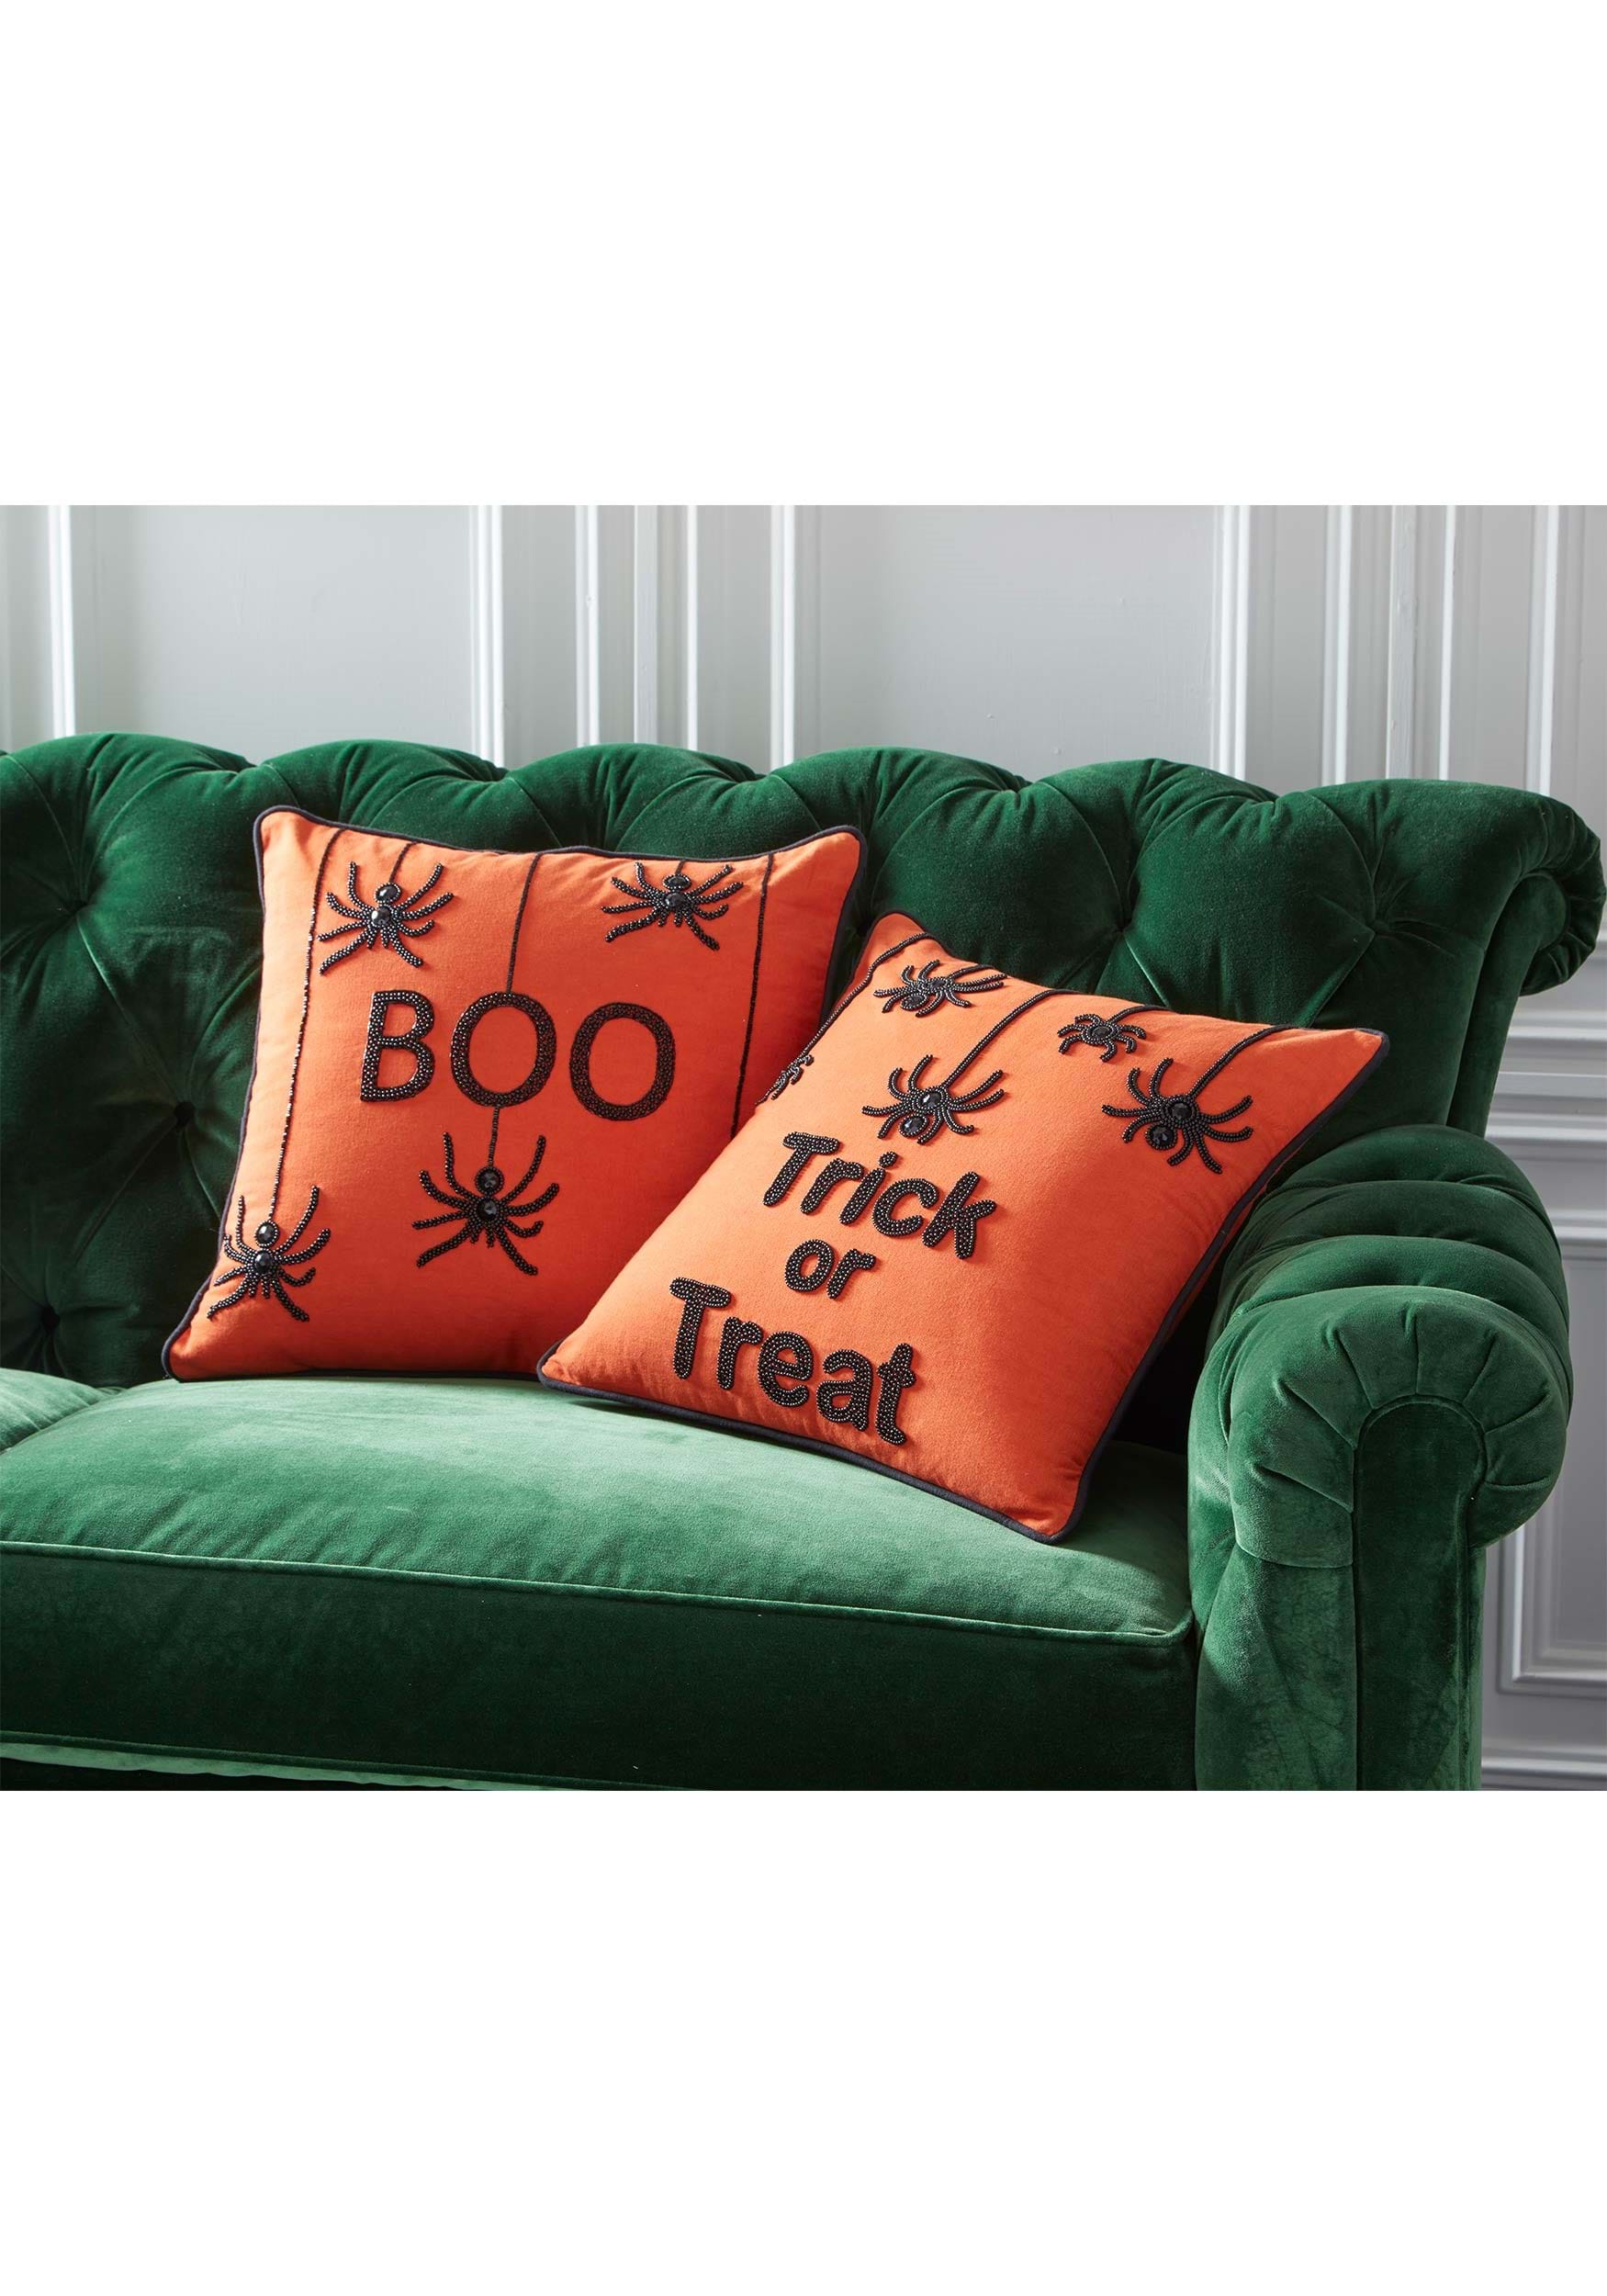 18-Inch Orange Square Beaded Trick Or Treat With Spiders Decorative Pillow